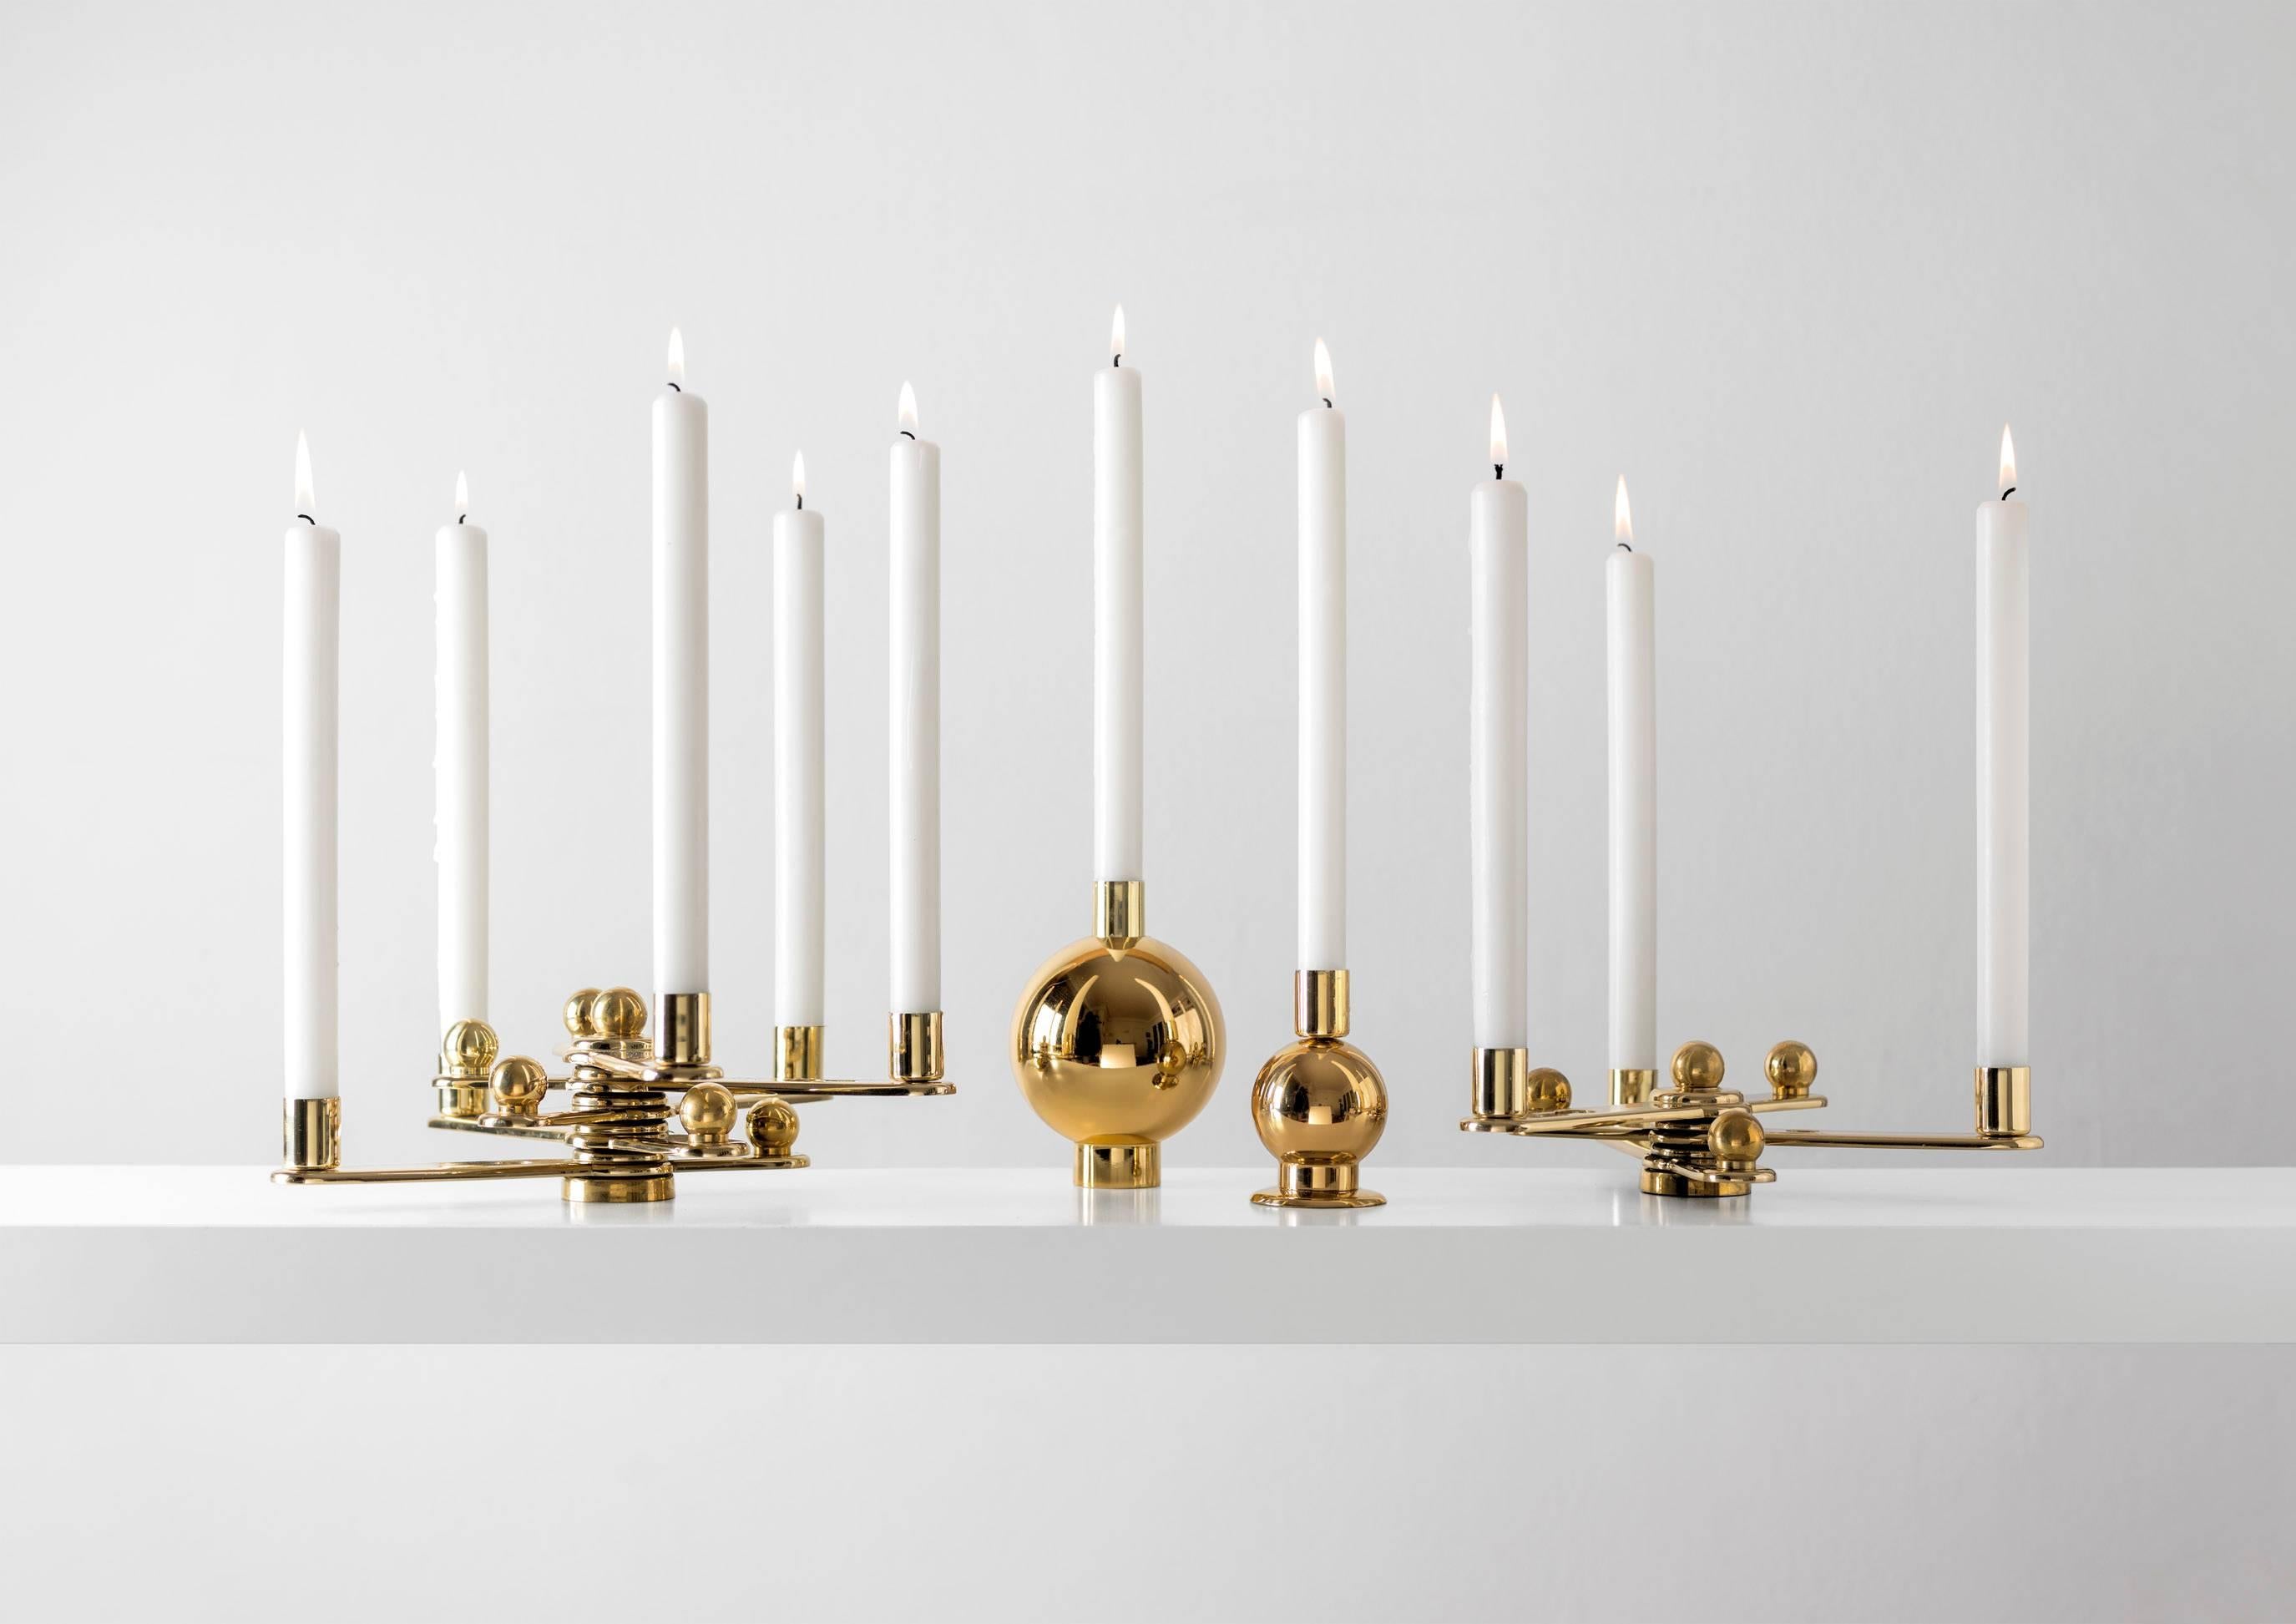 Spanish Candleholder in Polished Varnished Brass Limited Edition of 75 by BD Barcelona